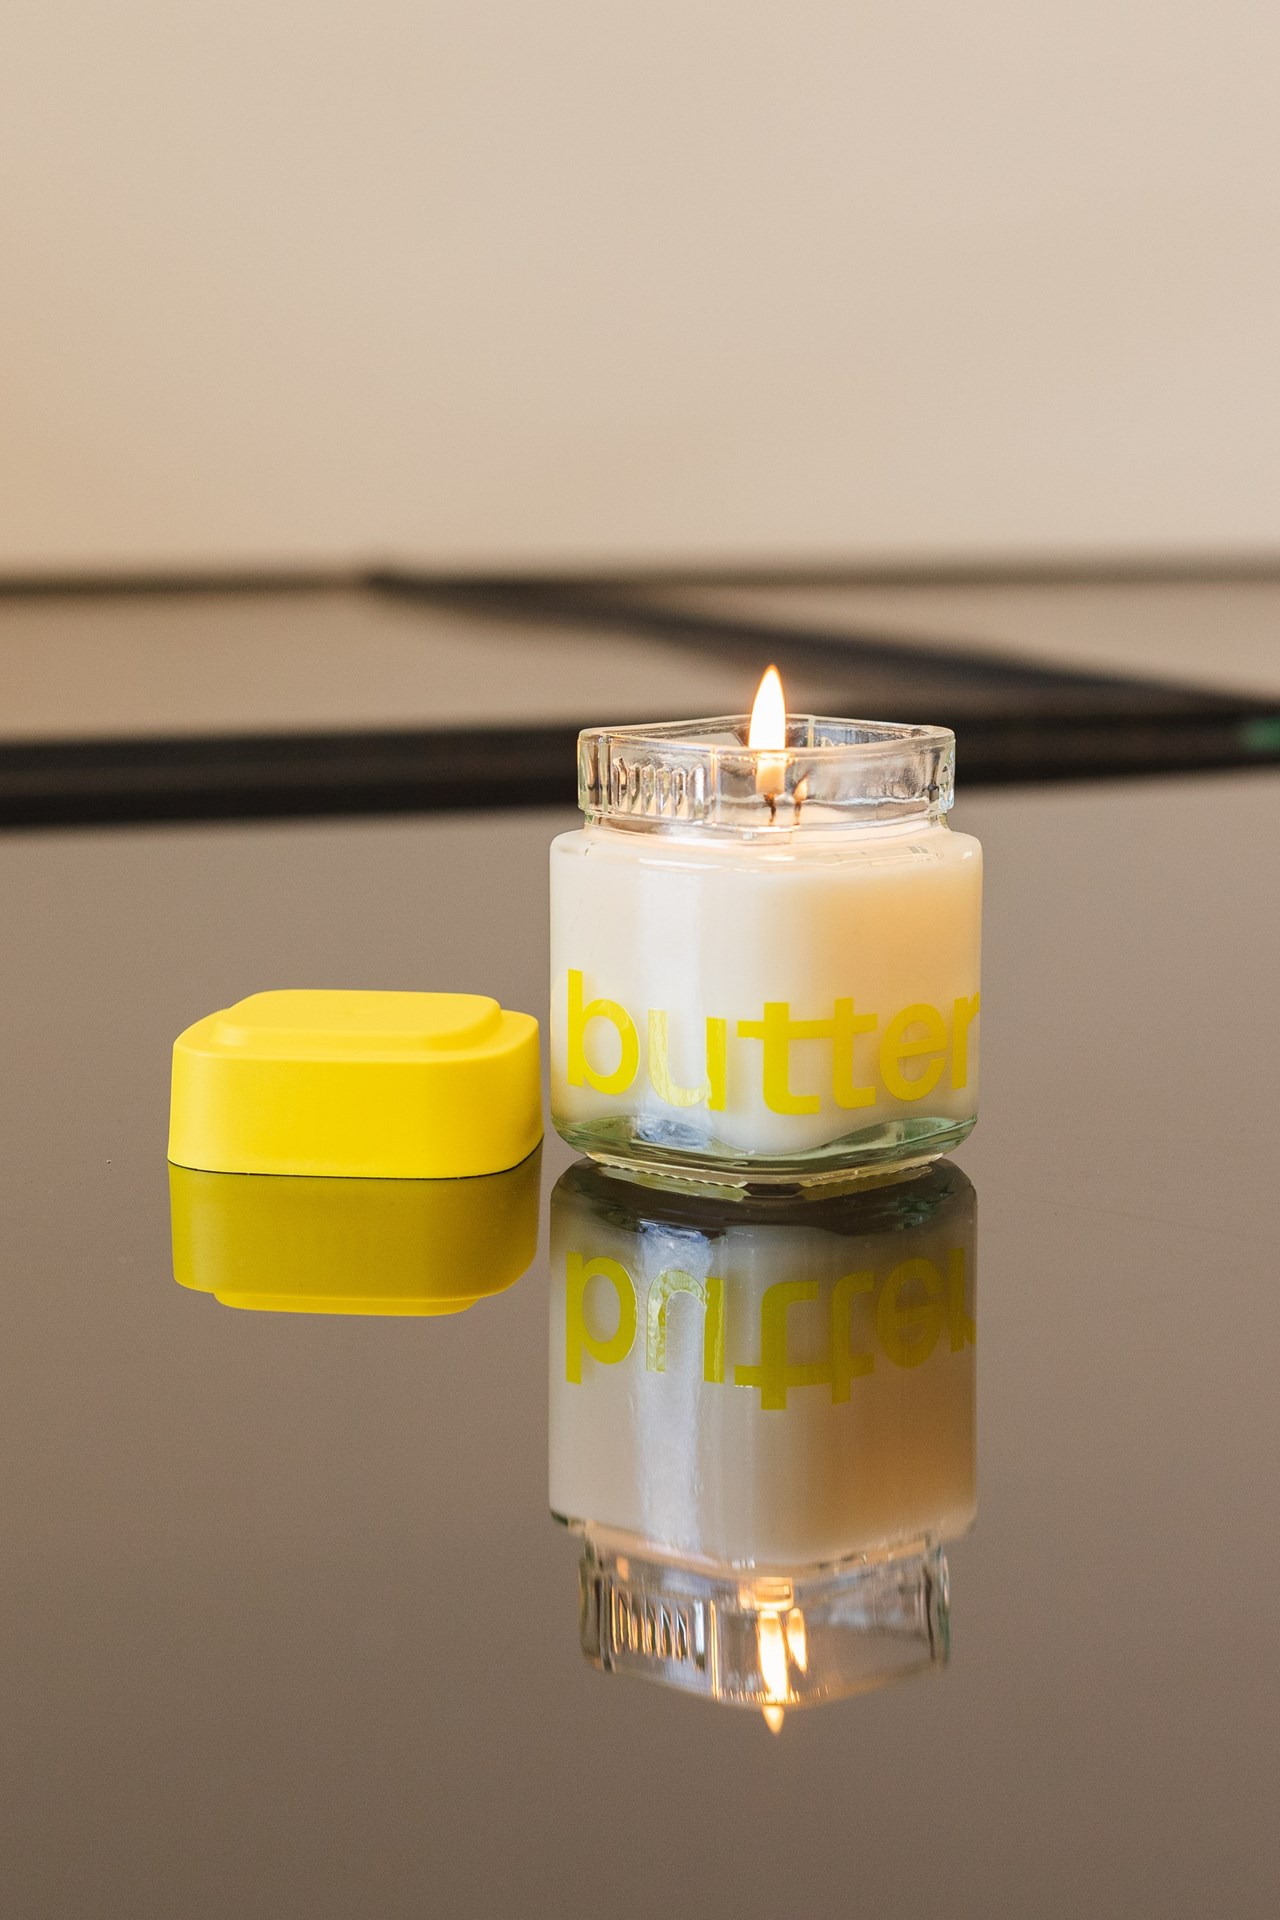 Calyx jar with Butter logo being reused as a candle holder filled with wax and lit wick